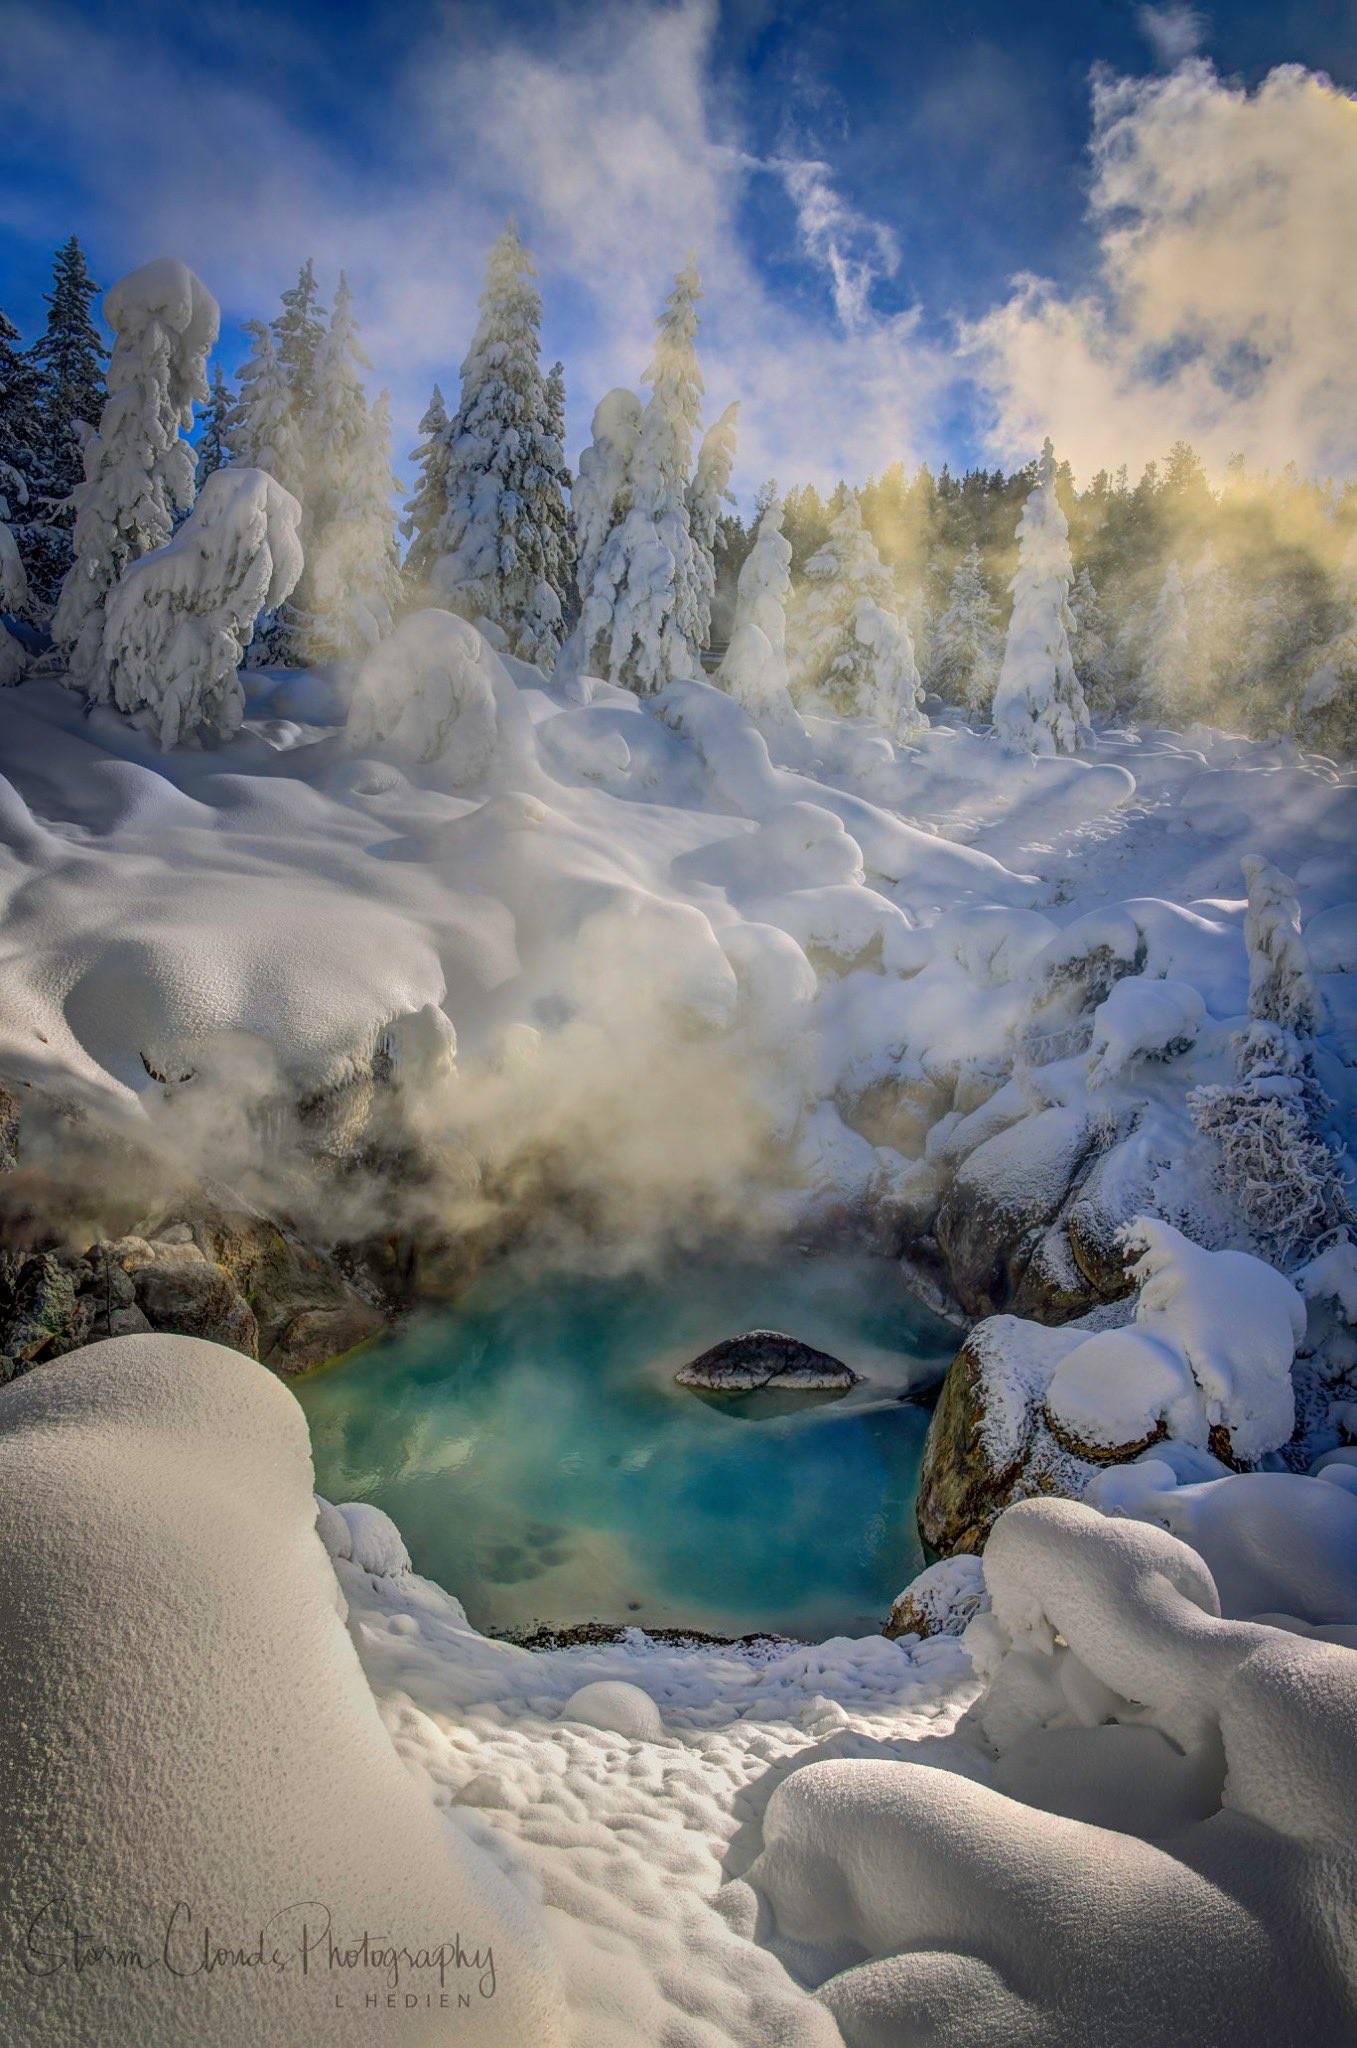 2nd Place A hot spring in Yellowstone National Park by Laura Hedien @lhedien